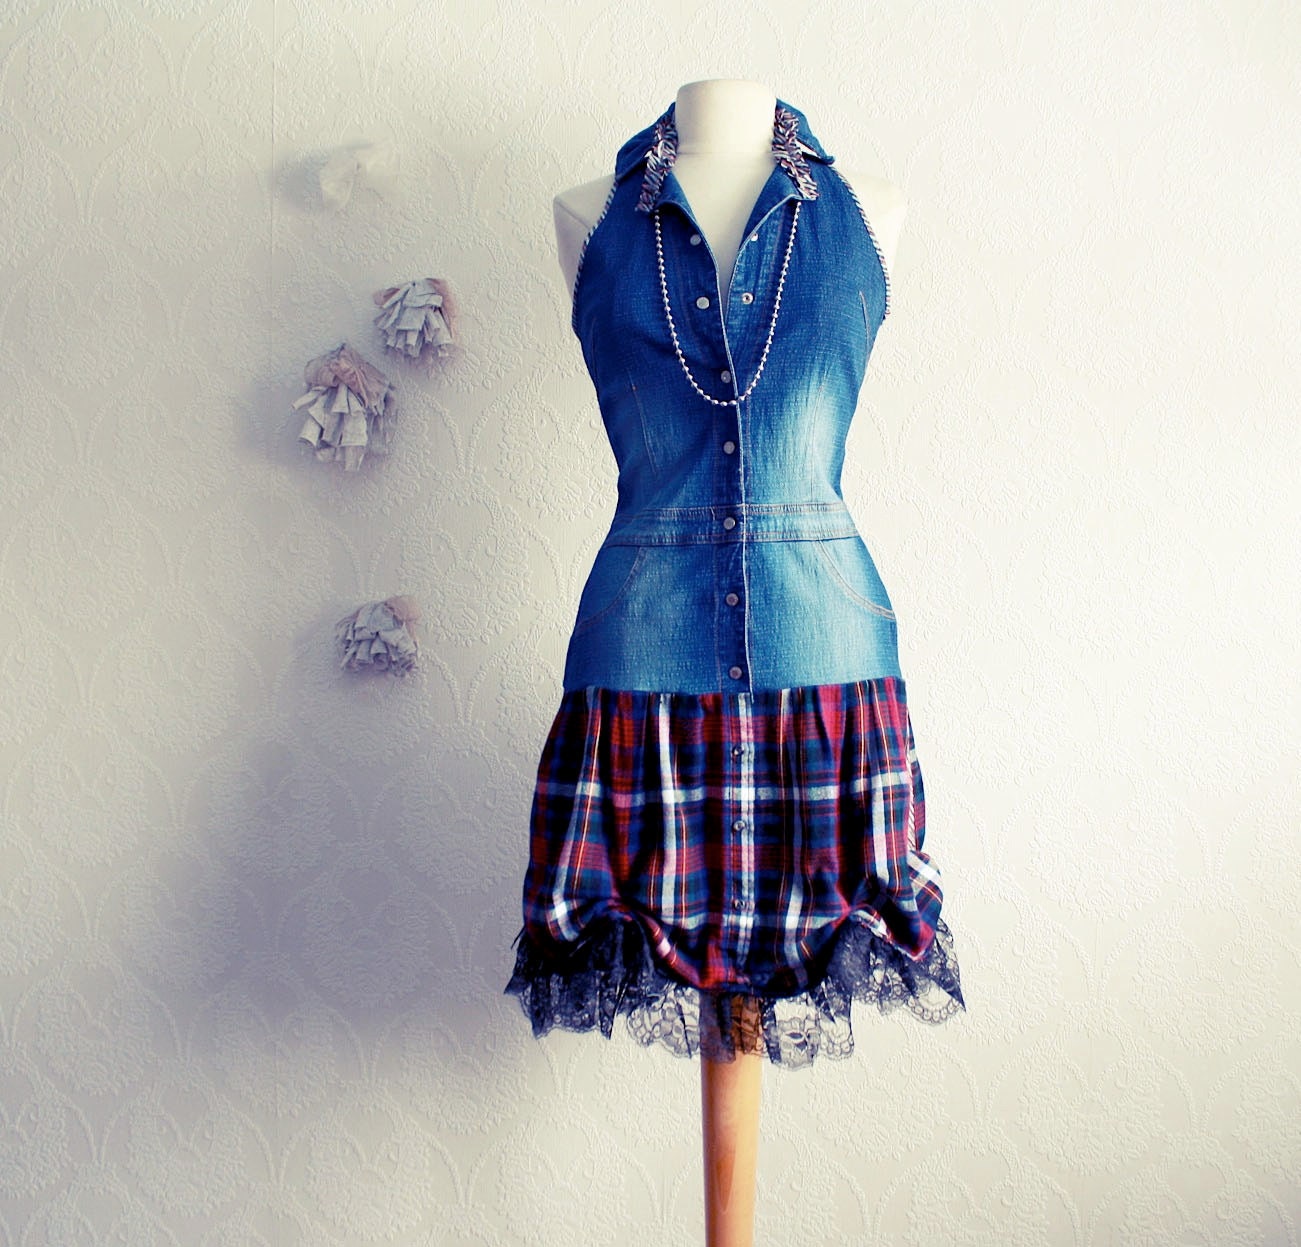 clothing upcycled dress clothes upcycling plaid upcycle dresses rocker jean bing womens